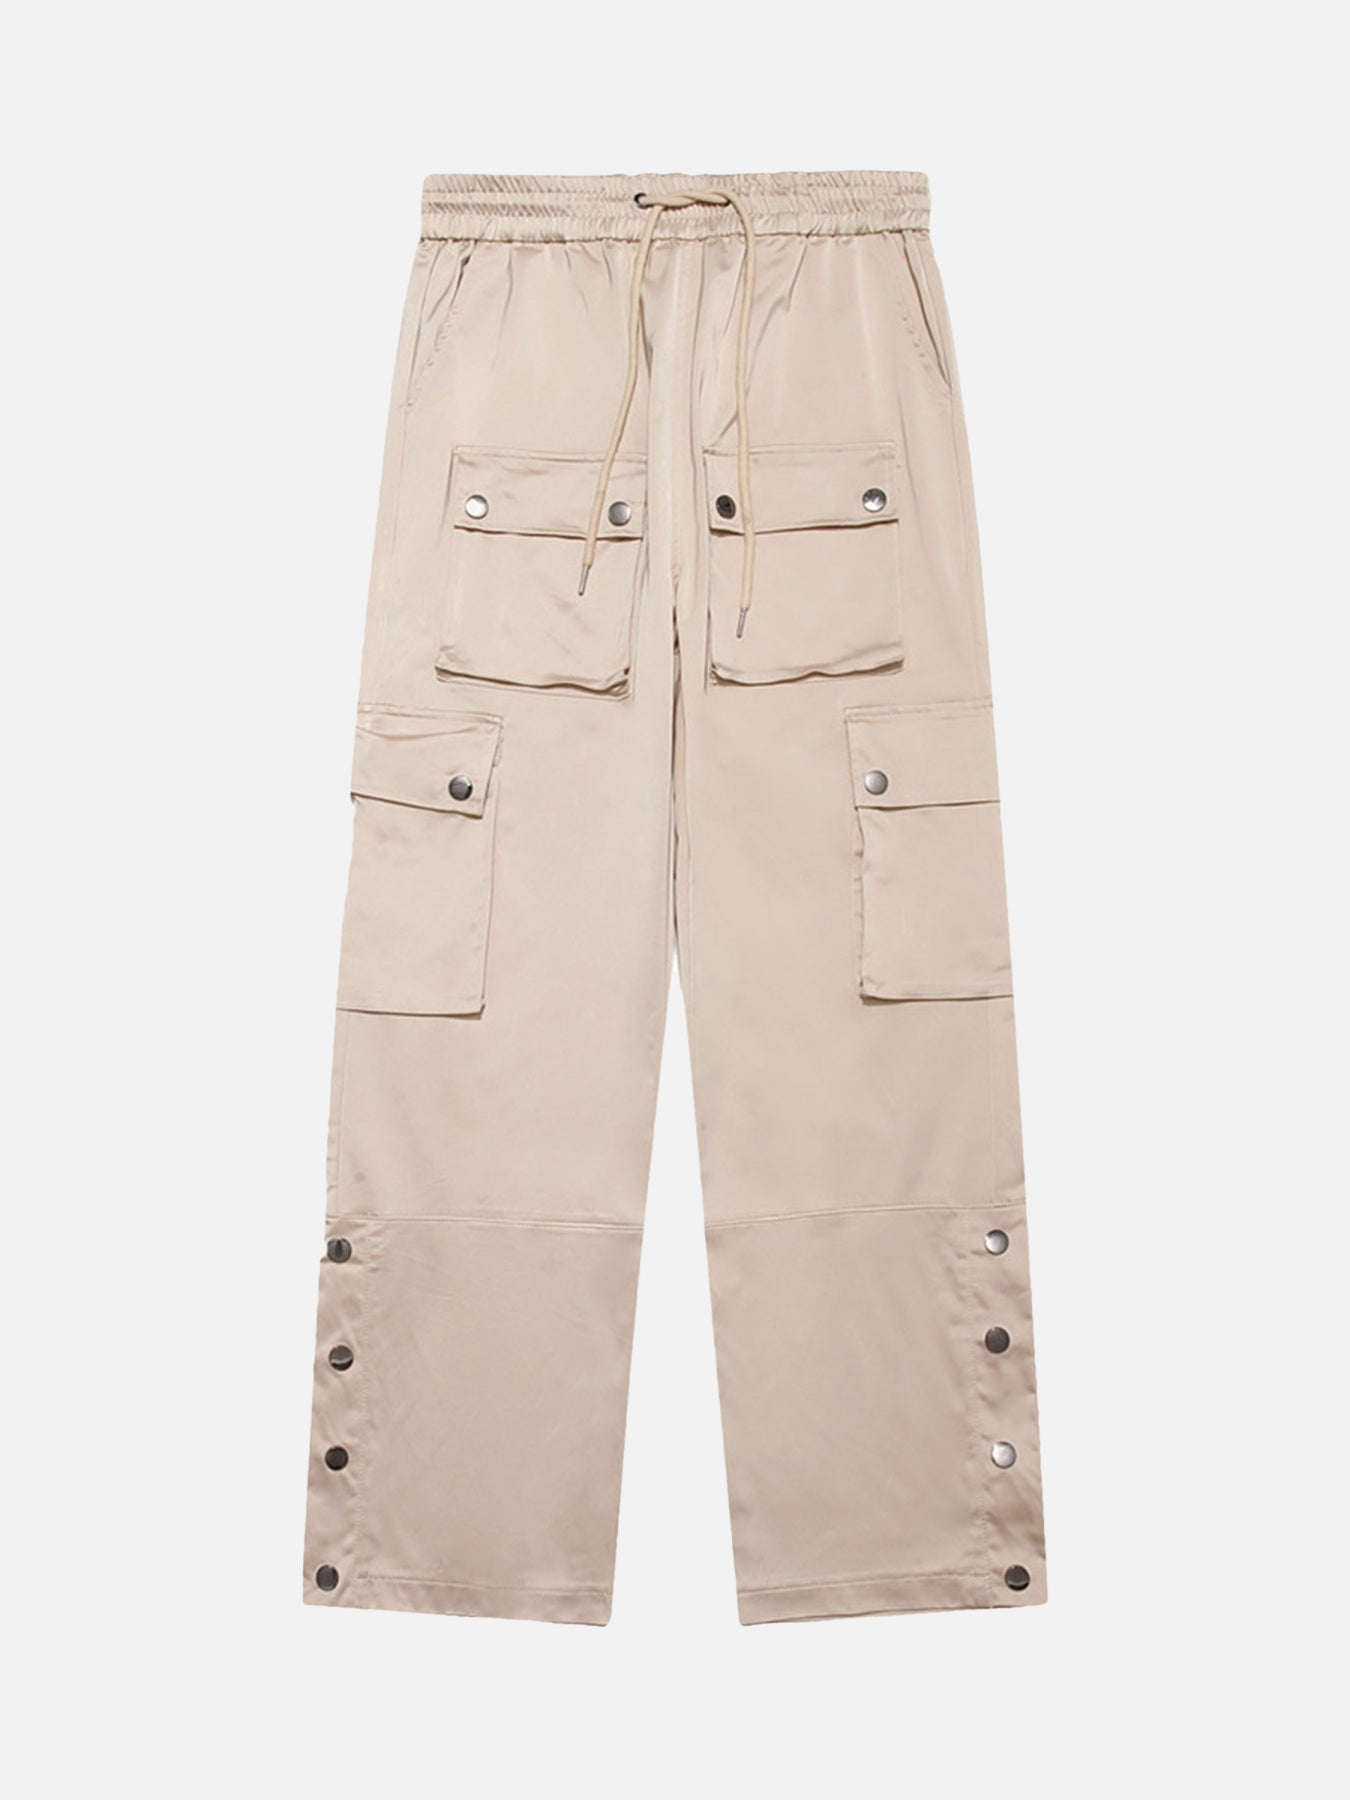 The Supermade Functional Windproof Workwear Straight Leg Pants